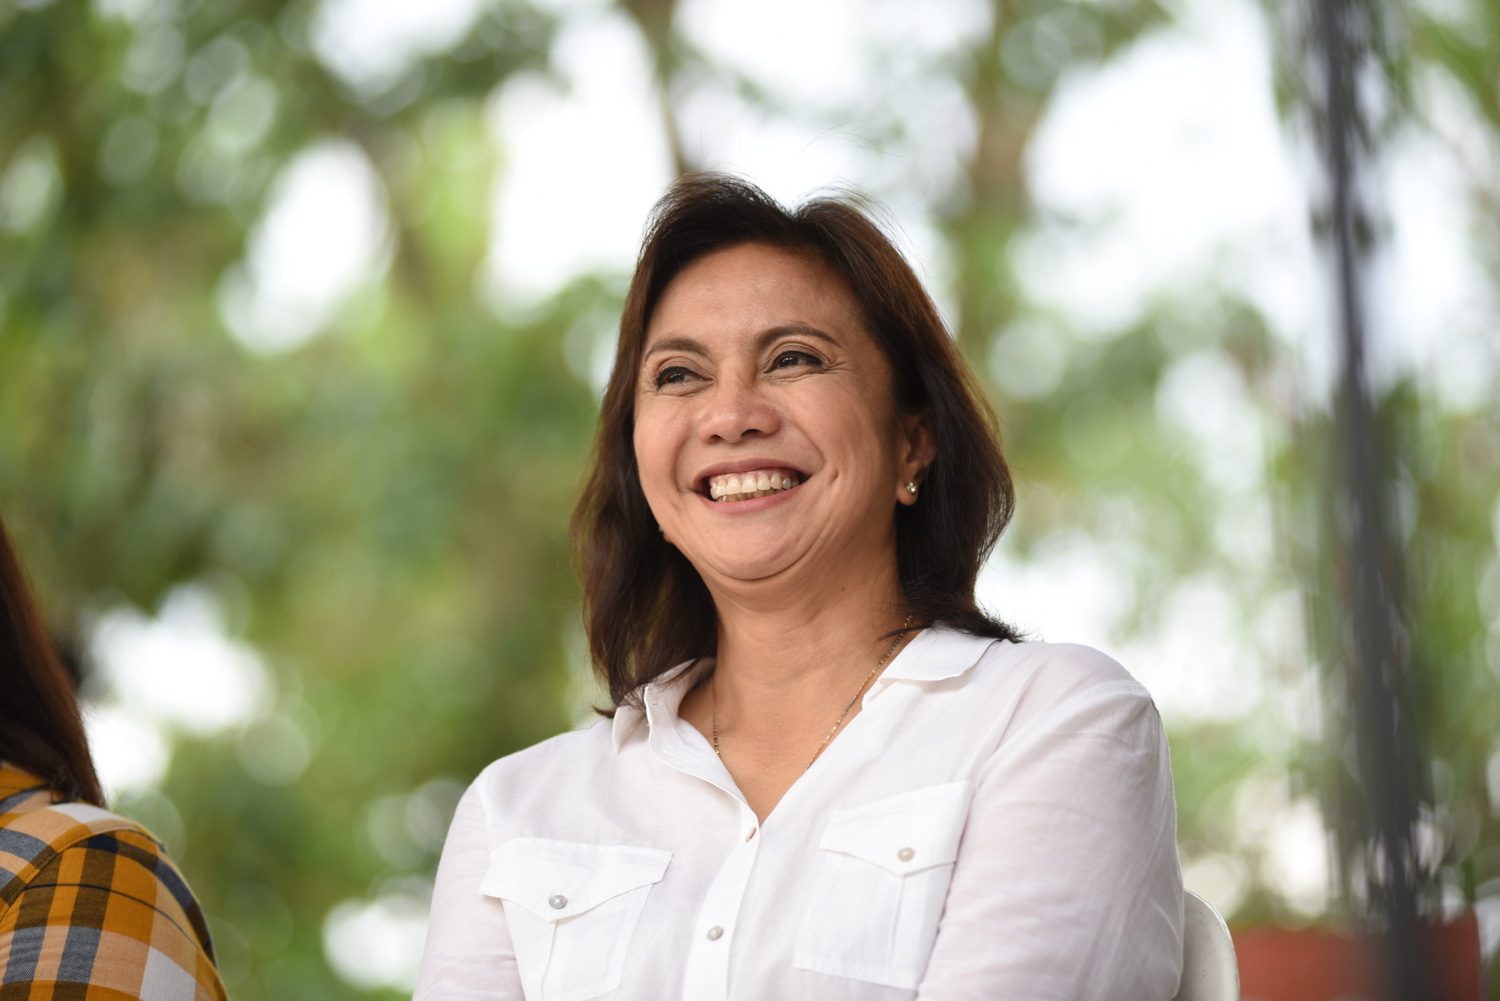 IN PHOTOS: Robredo ‘declares’ win, asks supporters to ‘end divisiveness’